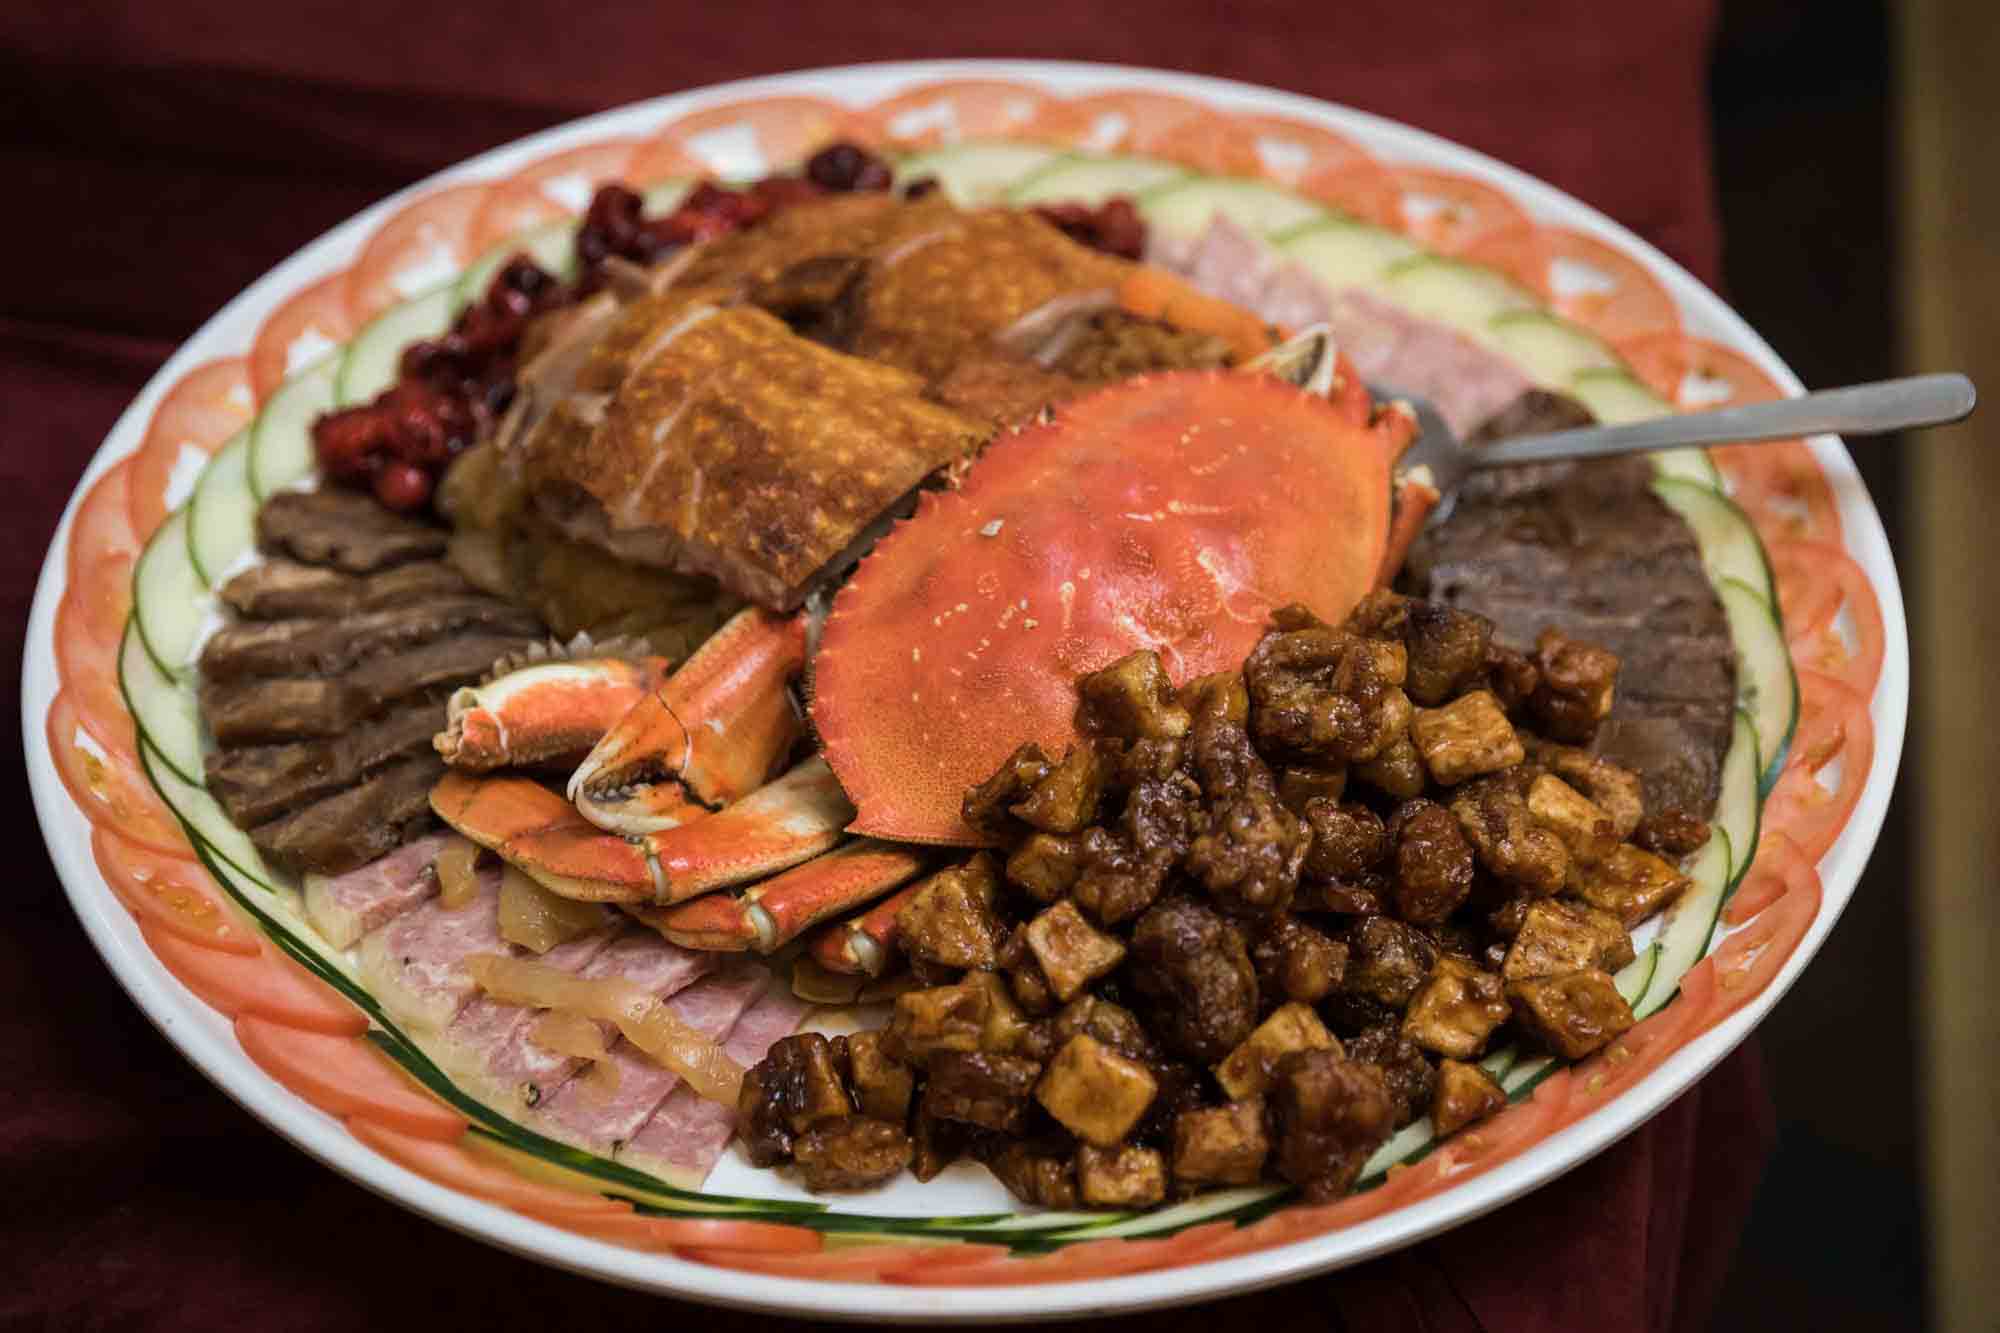 Chinese plate served with food including crab at a Sheraton LaGuardia East Hotel wedding